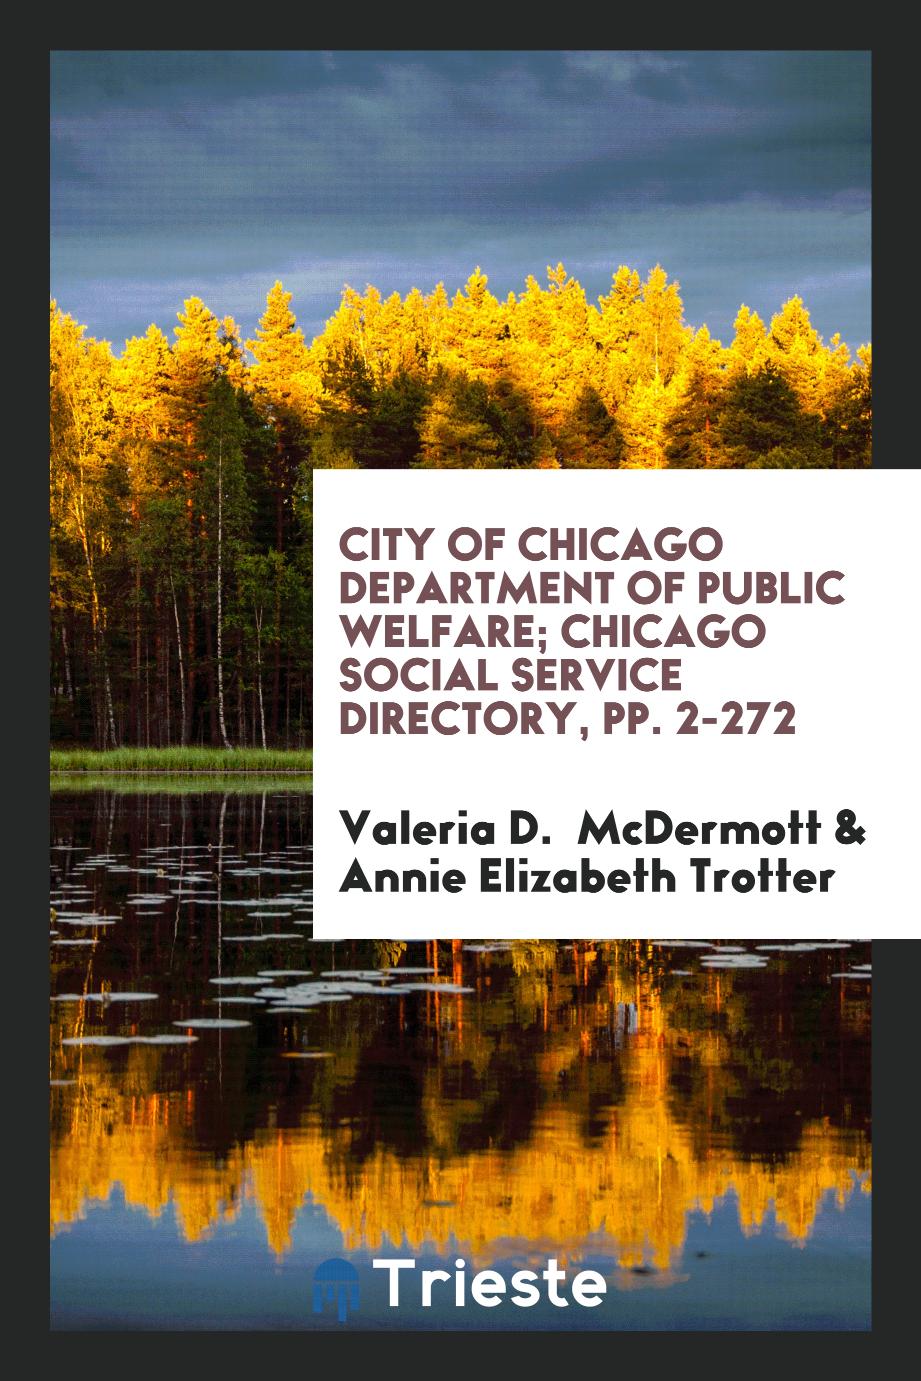 City of Chicago Department of Public Welfare; Chicago Social Service Directory, pp. 2-272